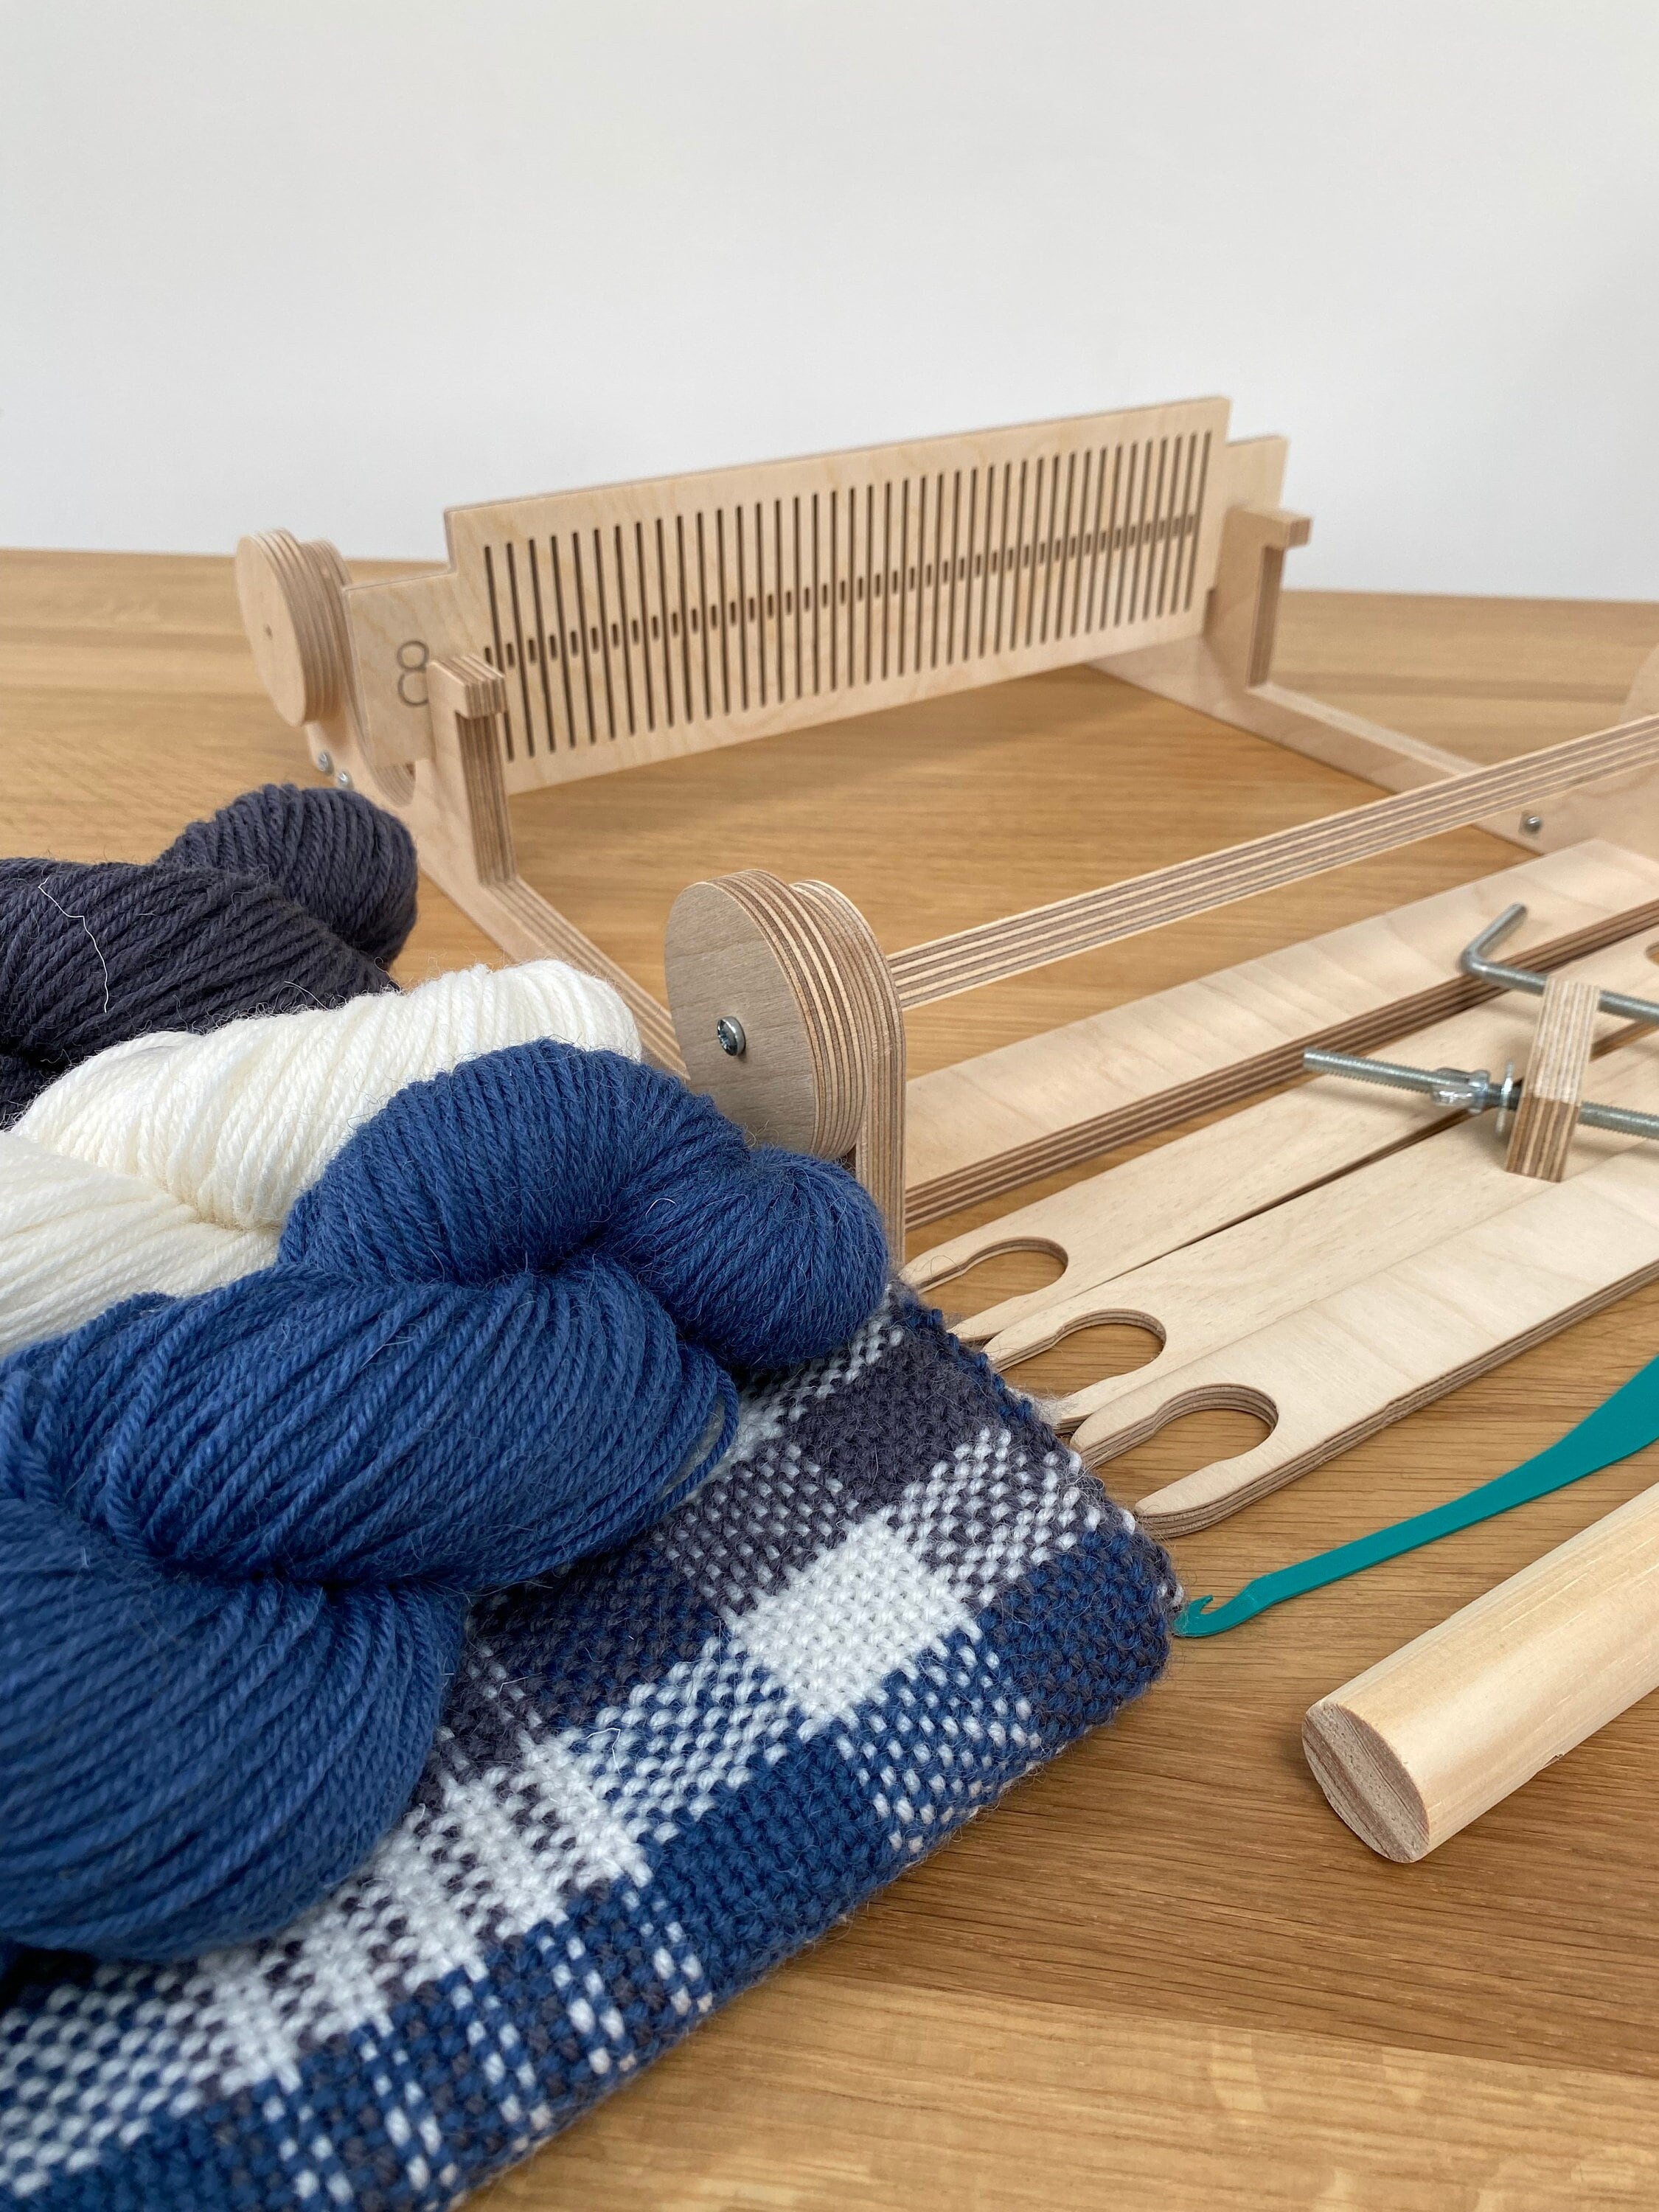 Rigid Heddle Loom, Scarf Weaving Kit Learn to Weave With This Loom,  Accessories, Yarn and Instructions to Weave a Beautiful Wool Scarf. 